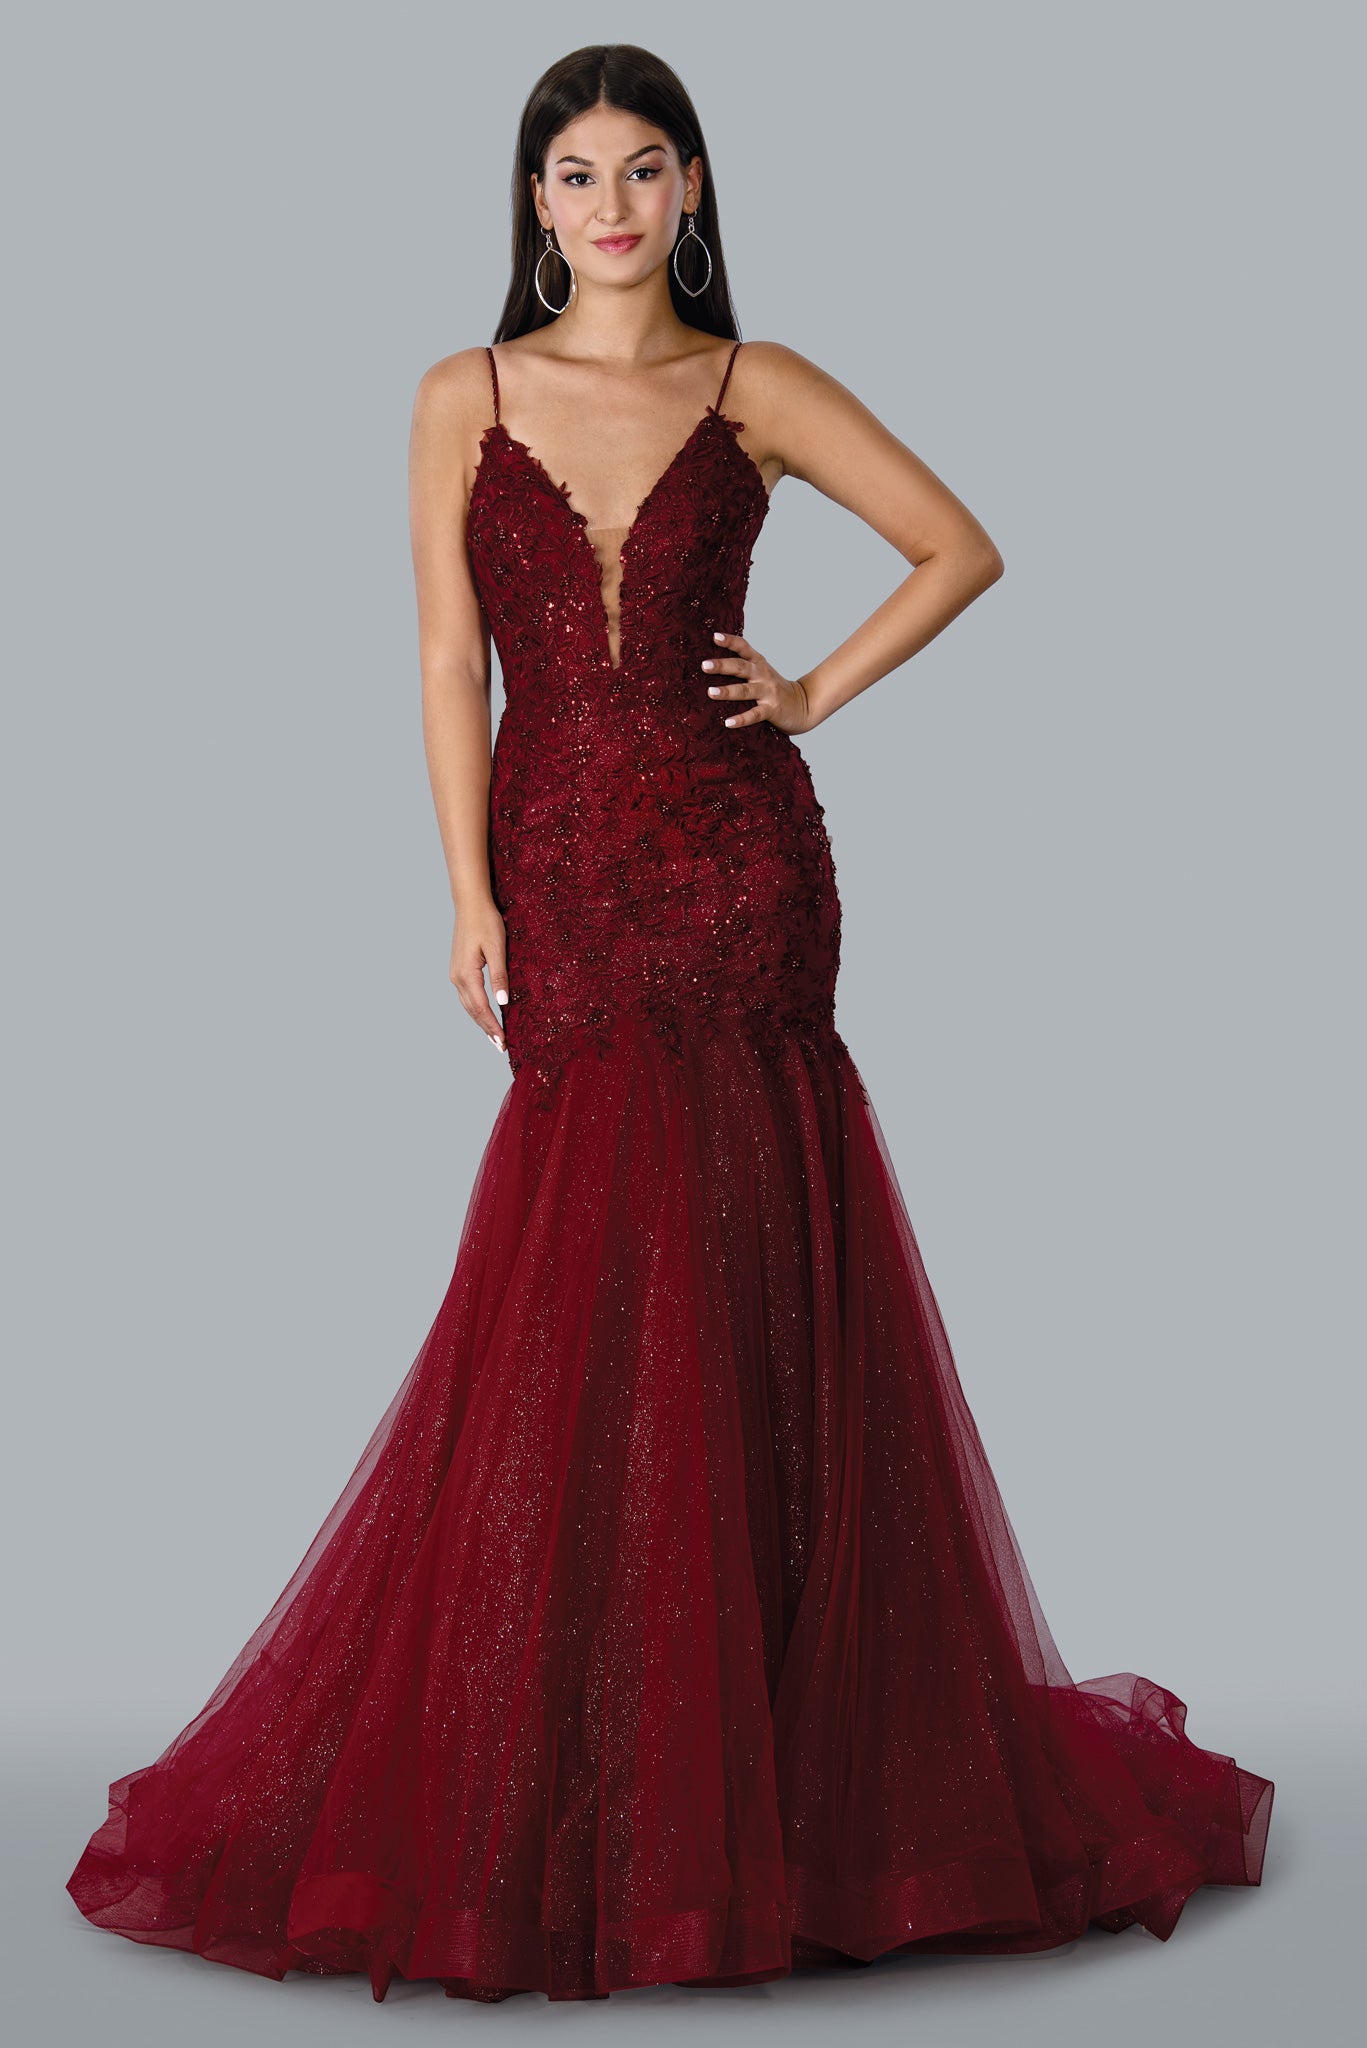 Stella Couture 22043 Long Shimmer Mermaid Prom Dress Pageant Gown Wedding Dress Bridal Gown Shimmer tulle mermaid skirt with lace bodice  Available Size: 4-20  Available Color: Navy, Purple, Black, Burgundy